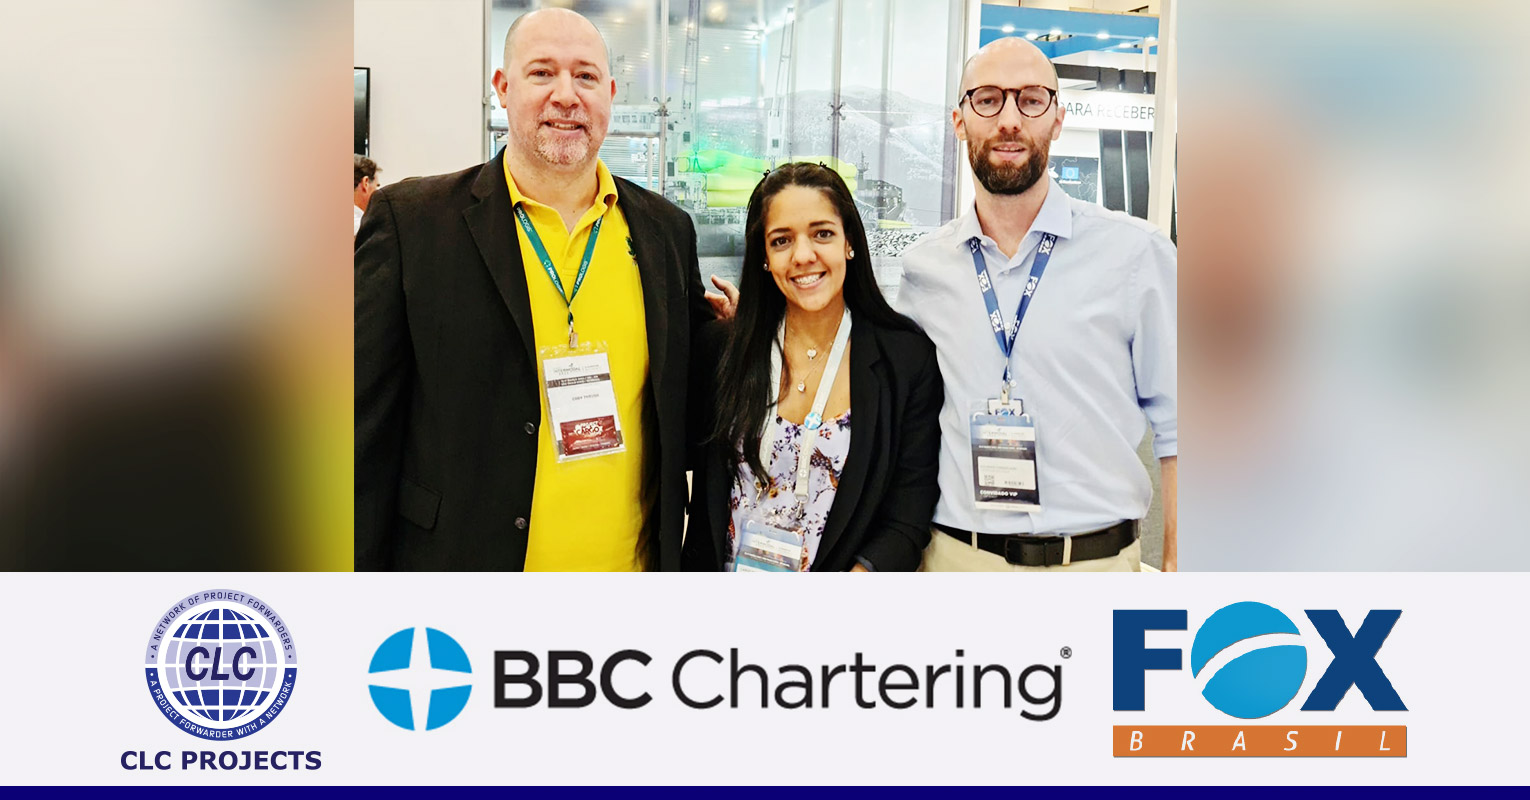 CLC Projects meeting with Carolina Guzman of BBC Chartering Colombia and Guilherme Furquim-Horch of Fox Brasil at Intermodal 2022